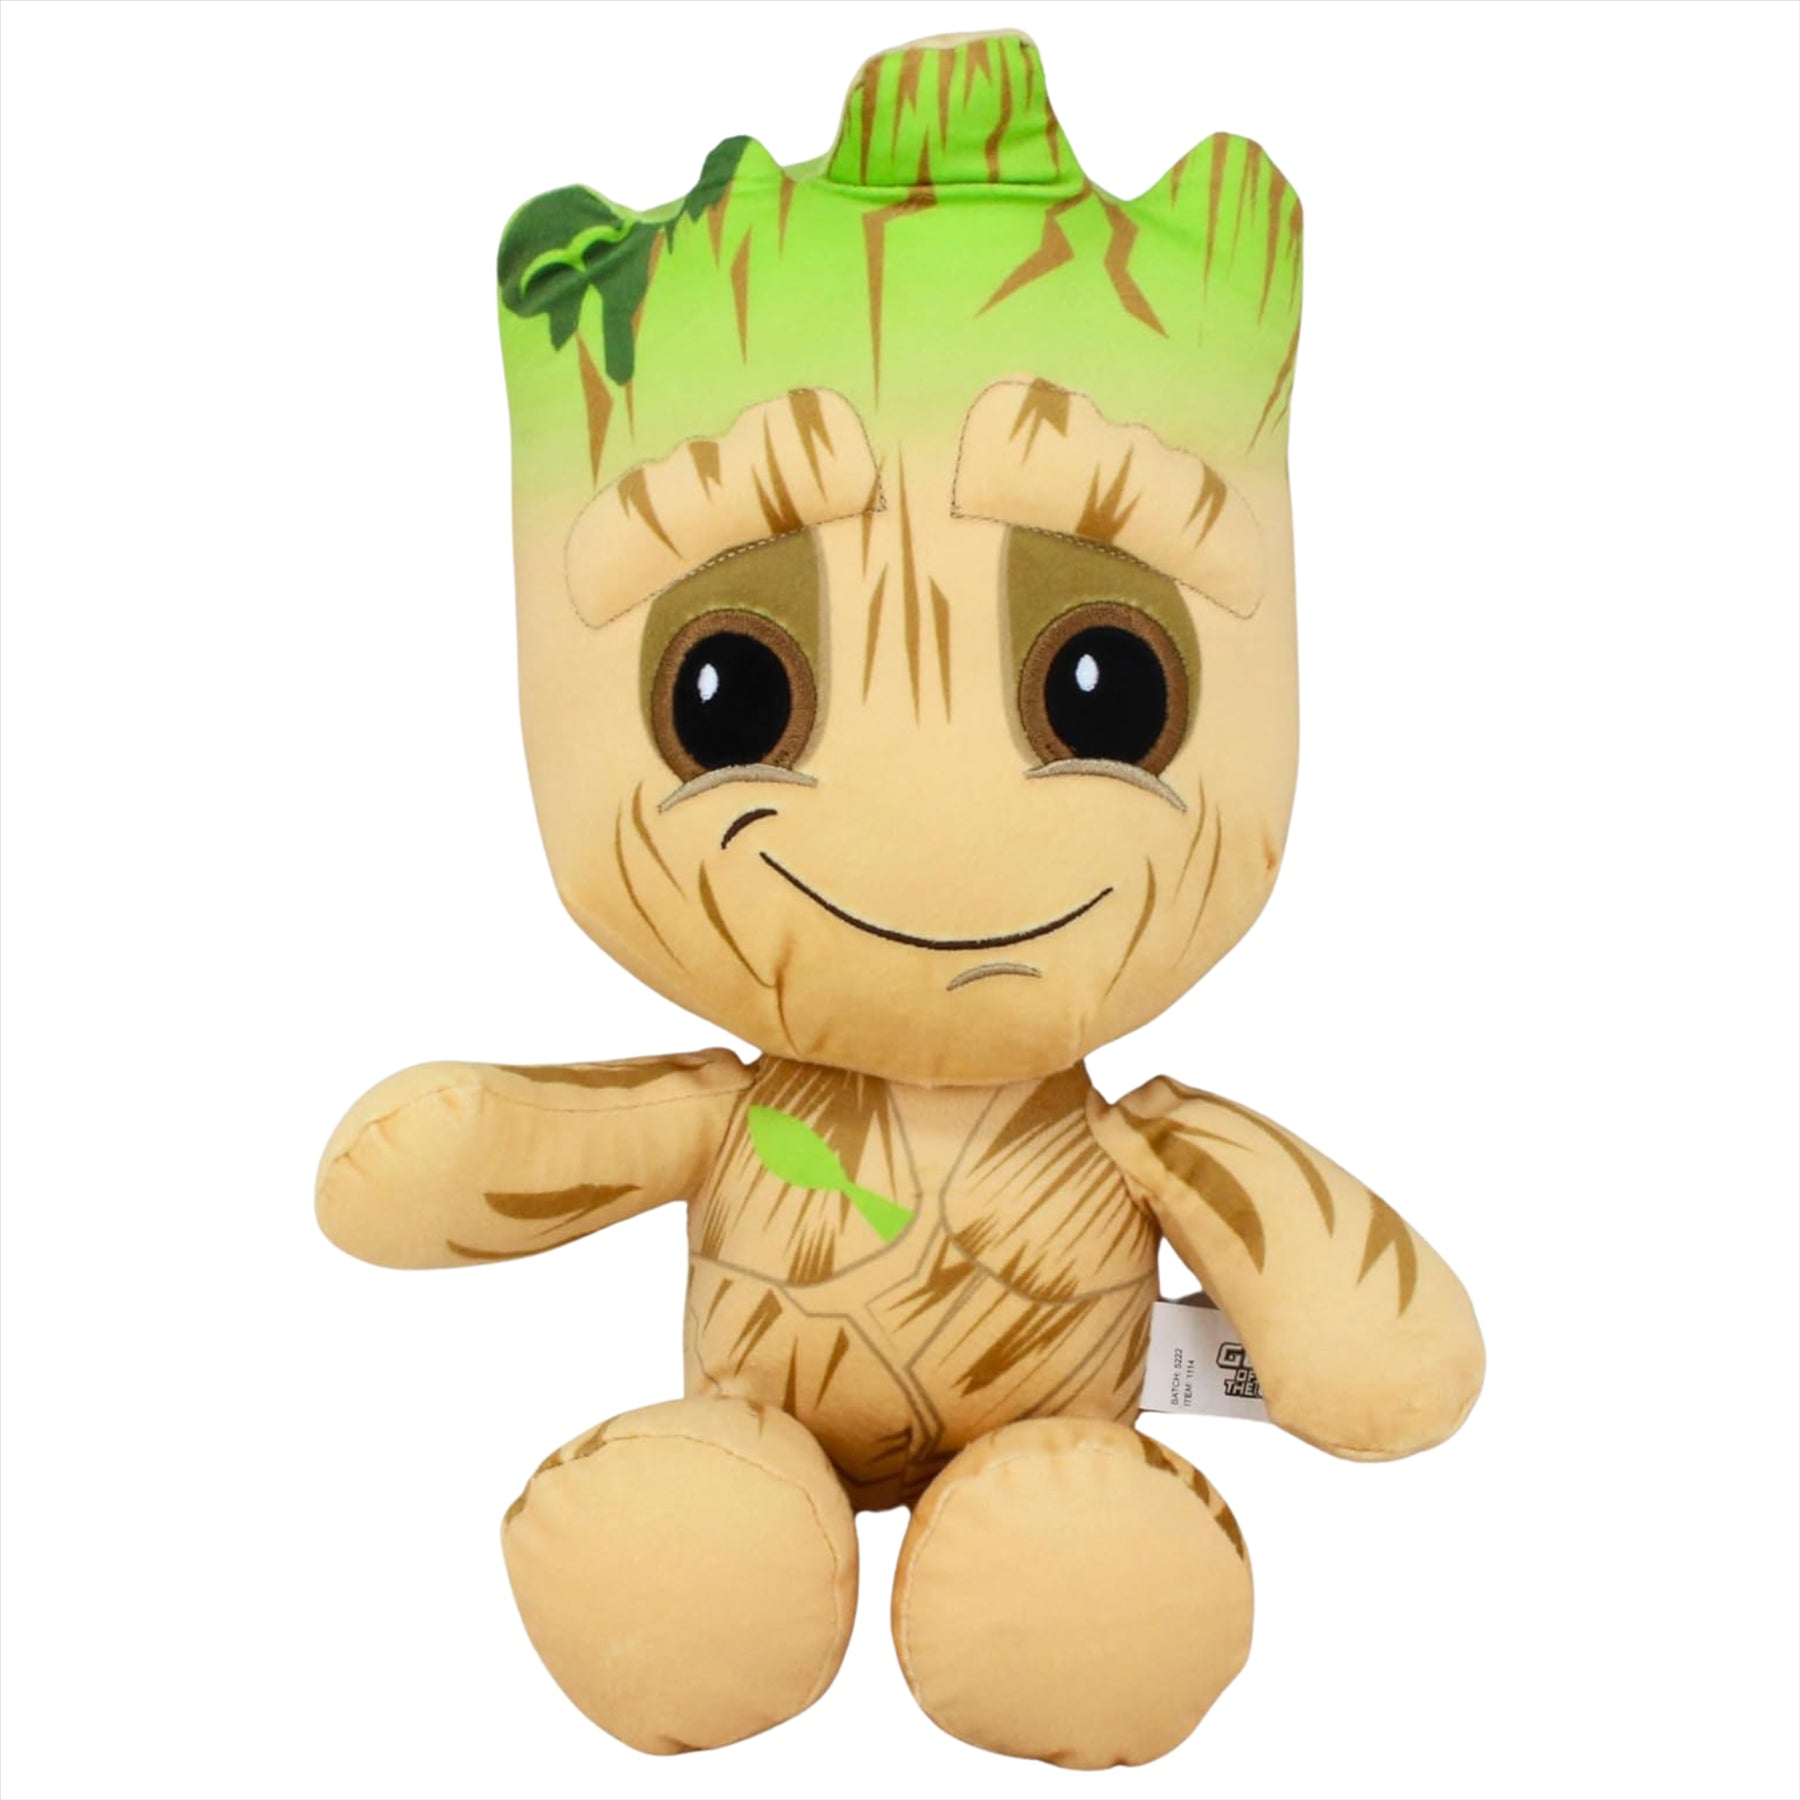 Guardians of the Galaxy Avengers Groot Super Soft Embroidered 36cm Plush Toy - Toptoys2u